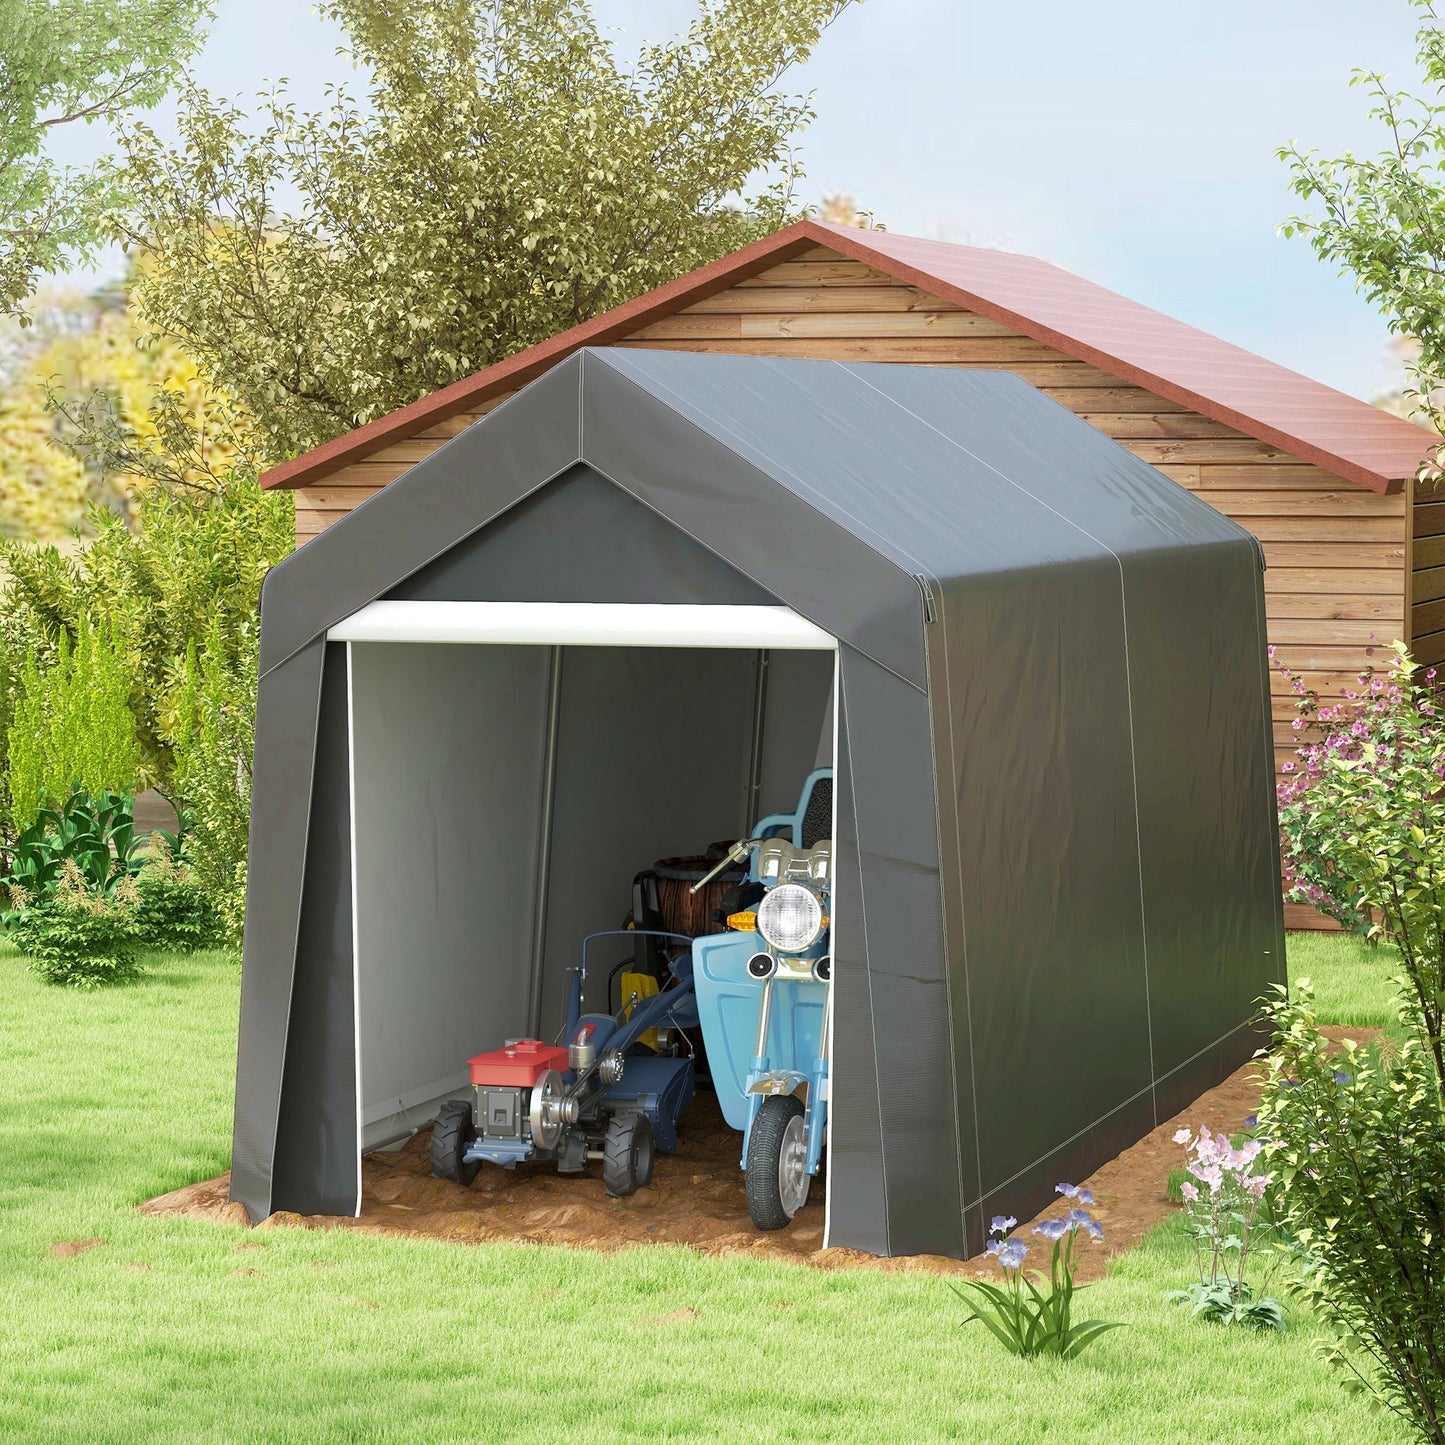 -Outsunny Galvanized 7' x 12' Outdoor Storage Tent, Heavy Duty and Waterproof Portable Shed, for Bike, Motorcycle, Tools, Gray - Outdoor Style Company